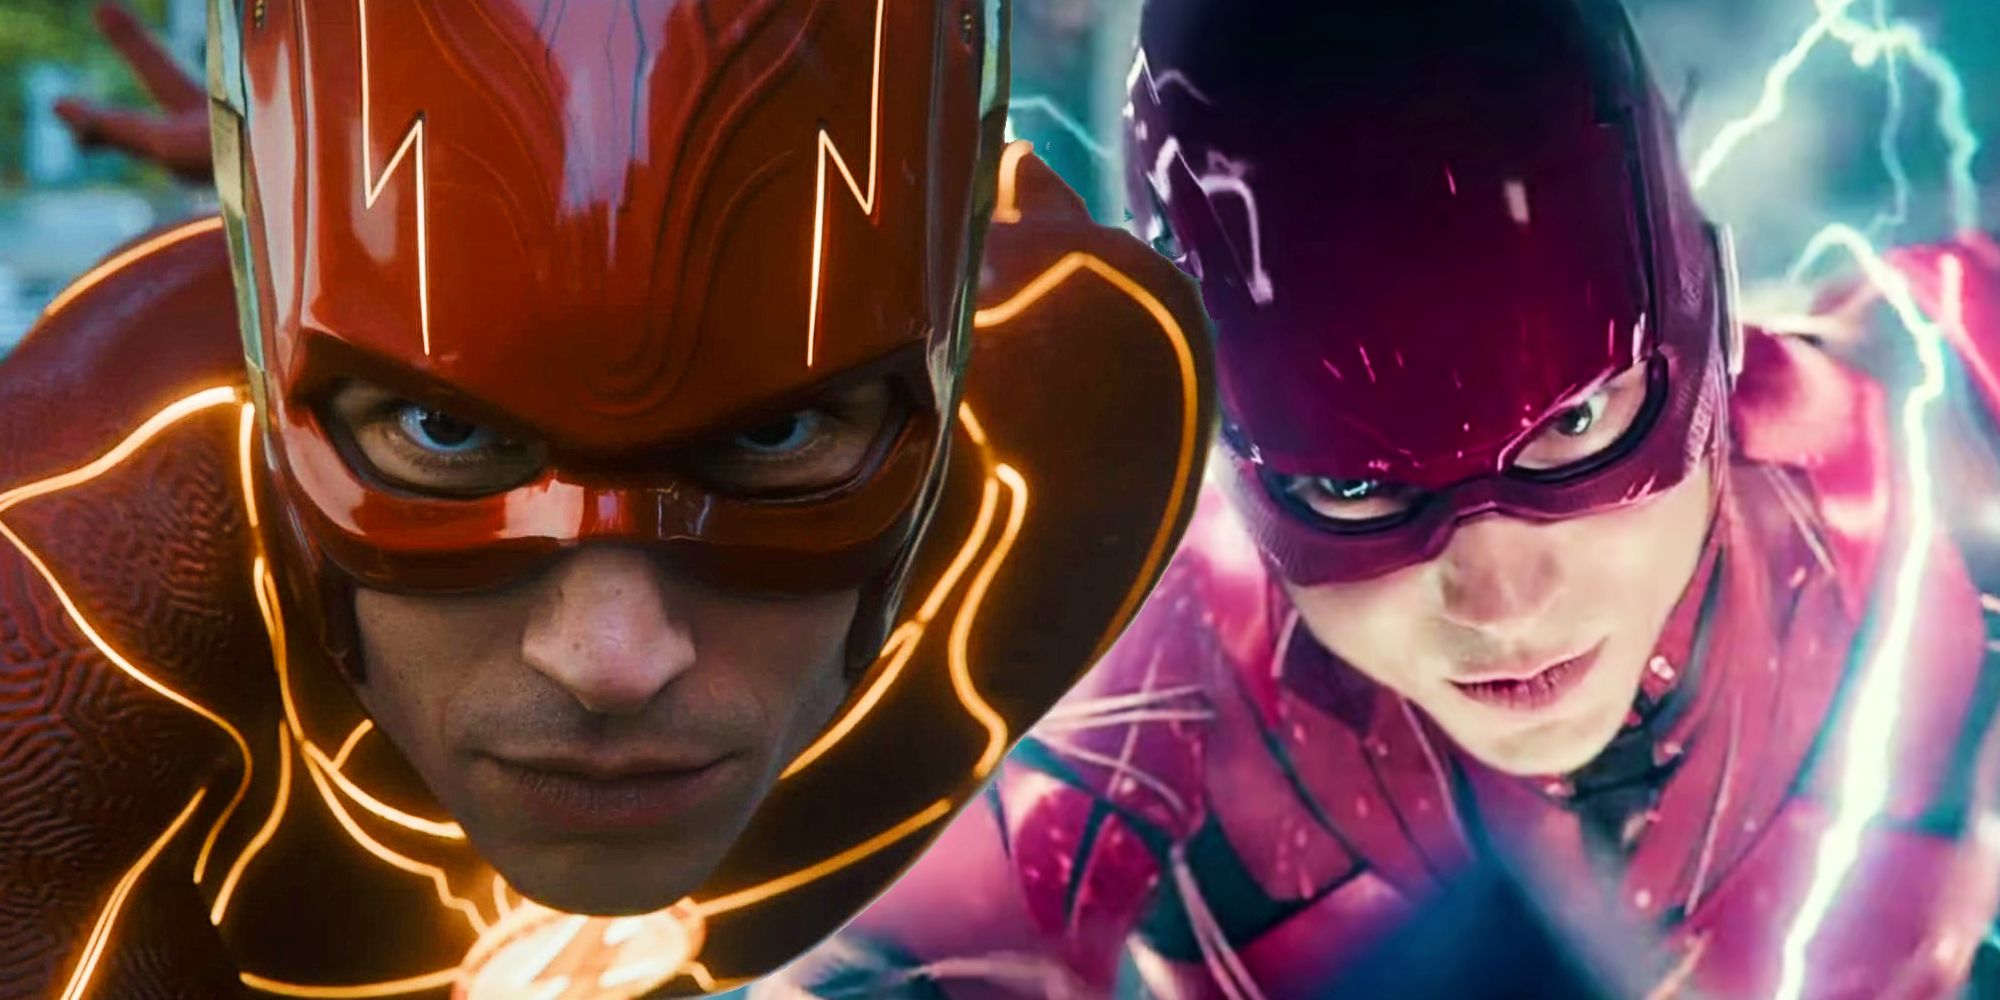 Ezra Miller as Barry Allen in The Flash and Justice League